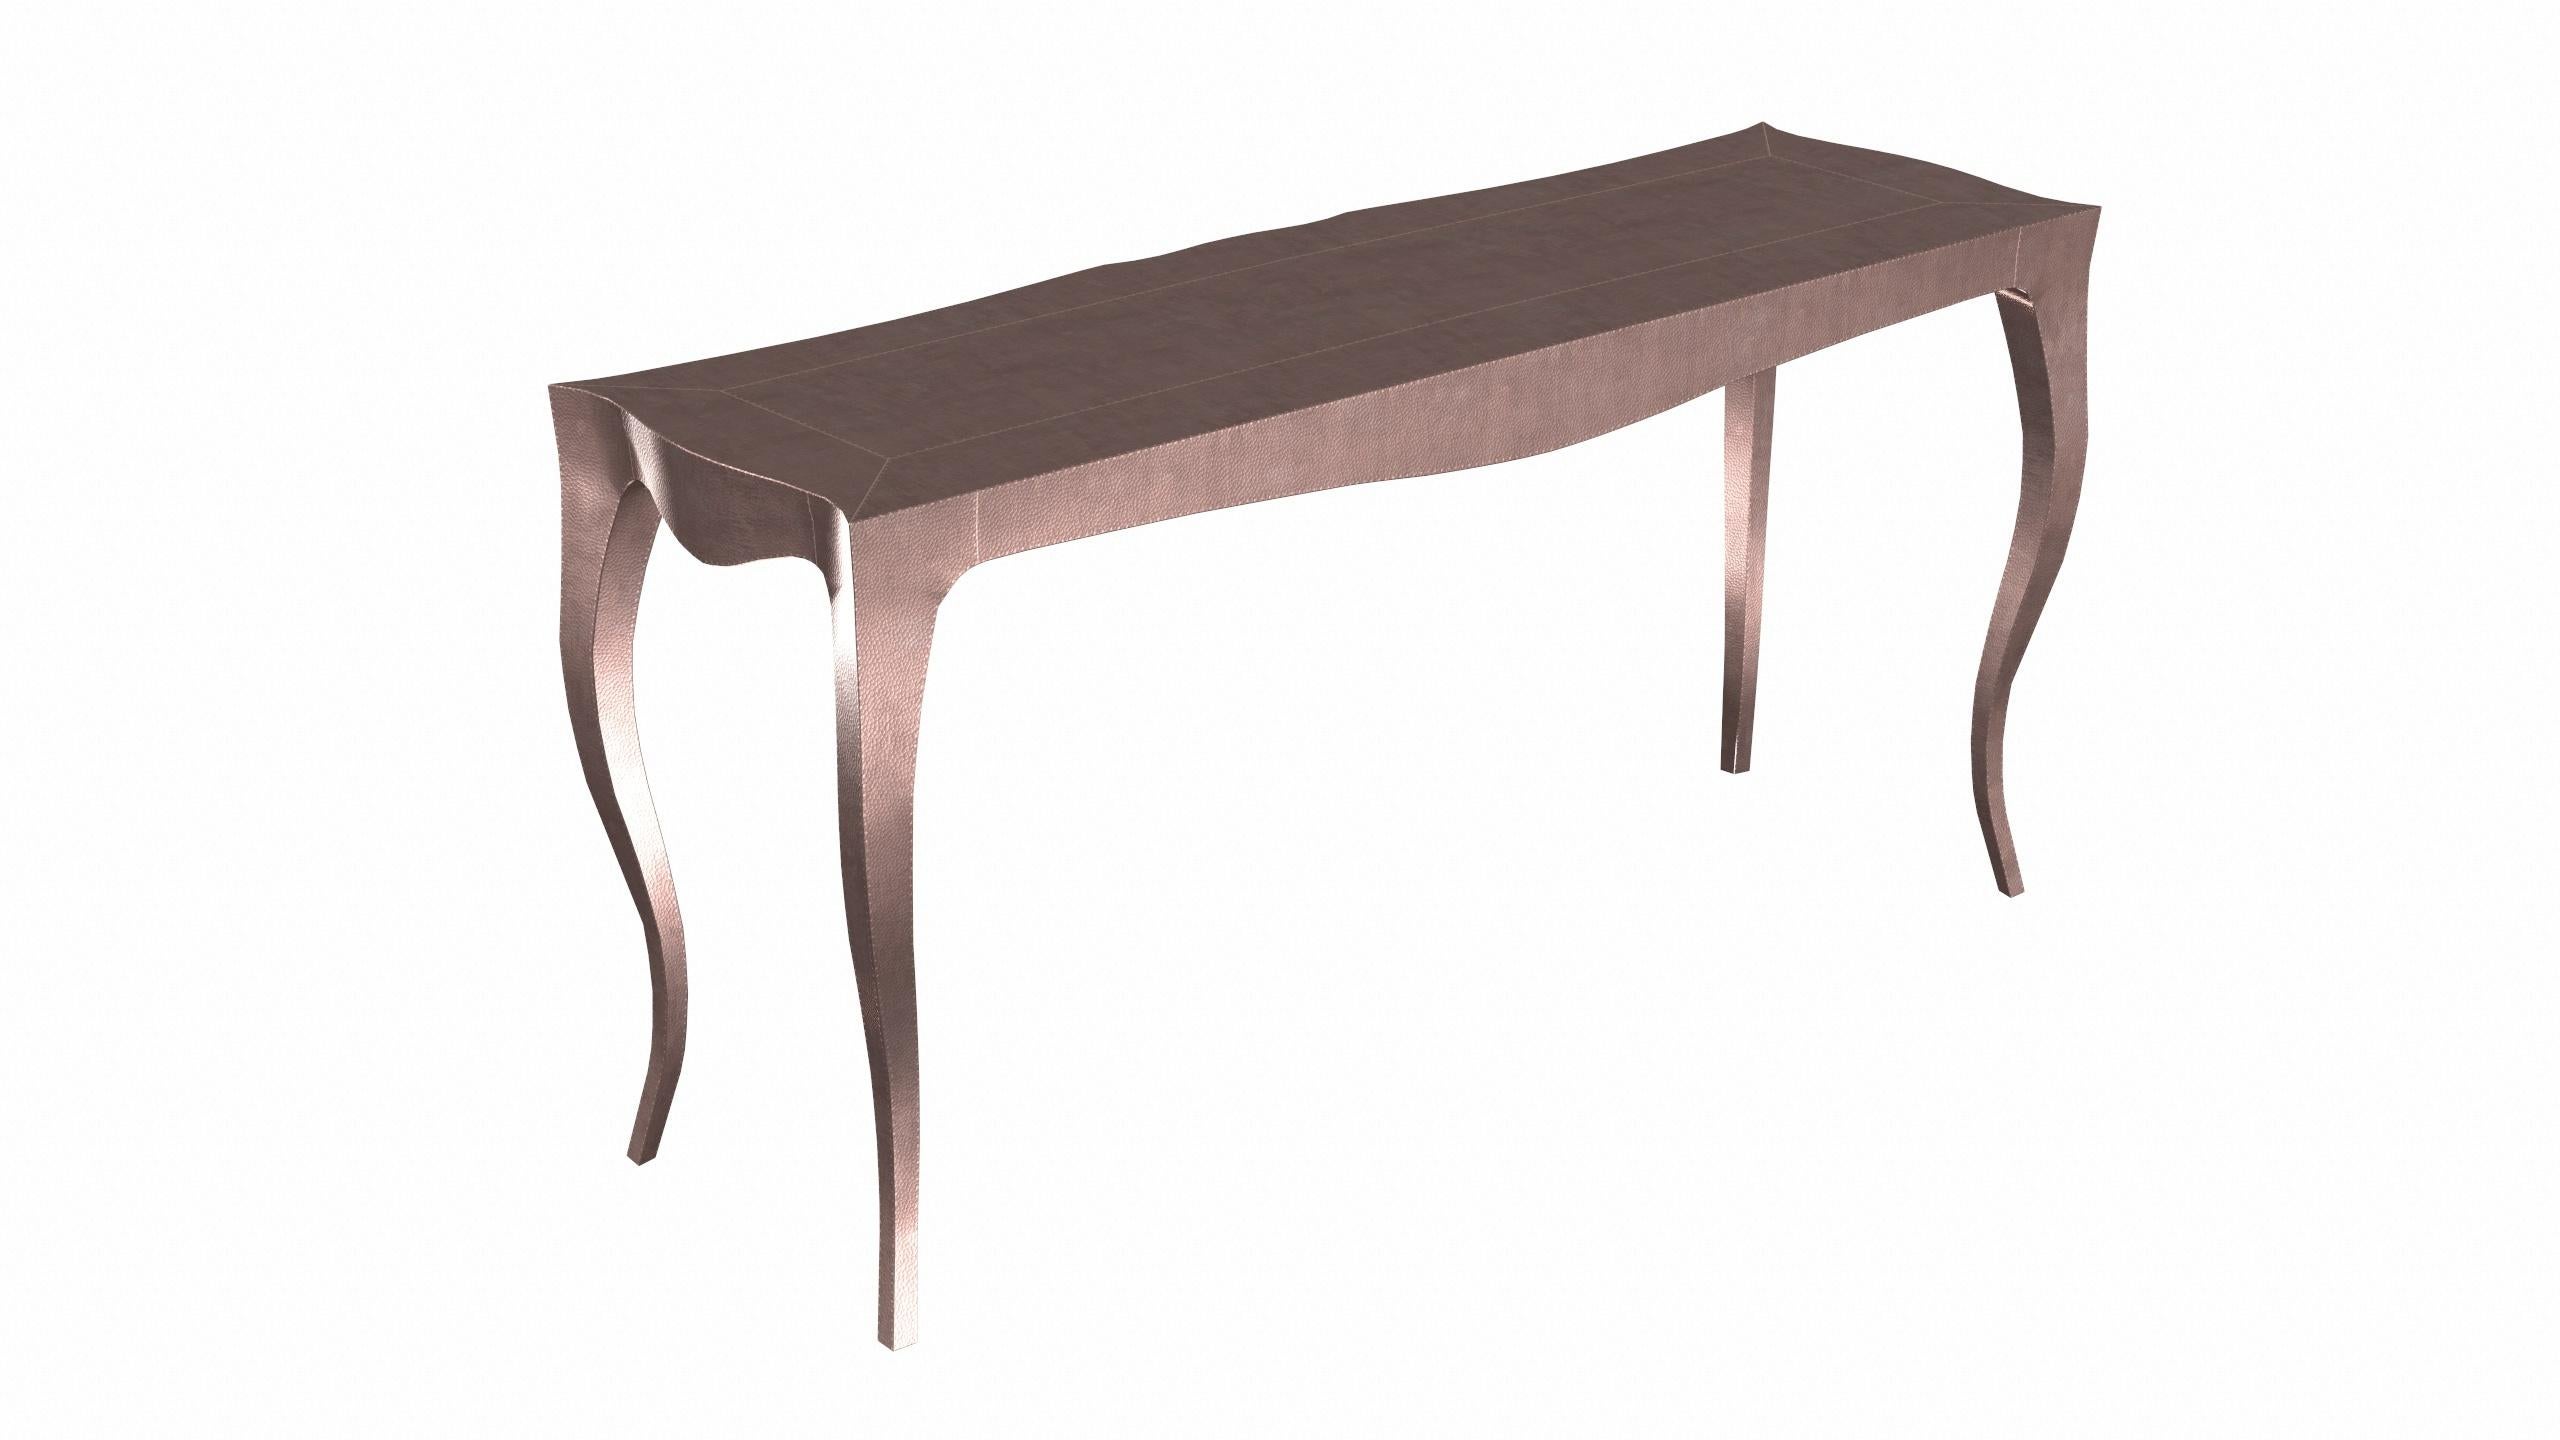 Metal Louise Console Art Deco Conference Tables Mid. Hammered Copper by Paul Mathieu For Sale